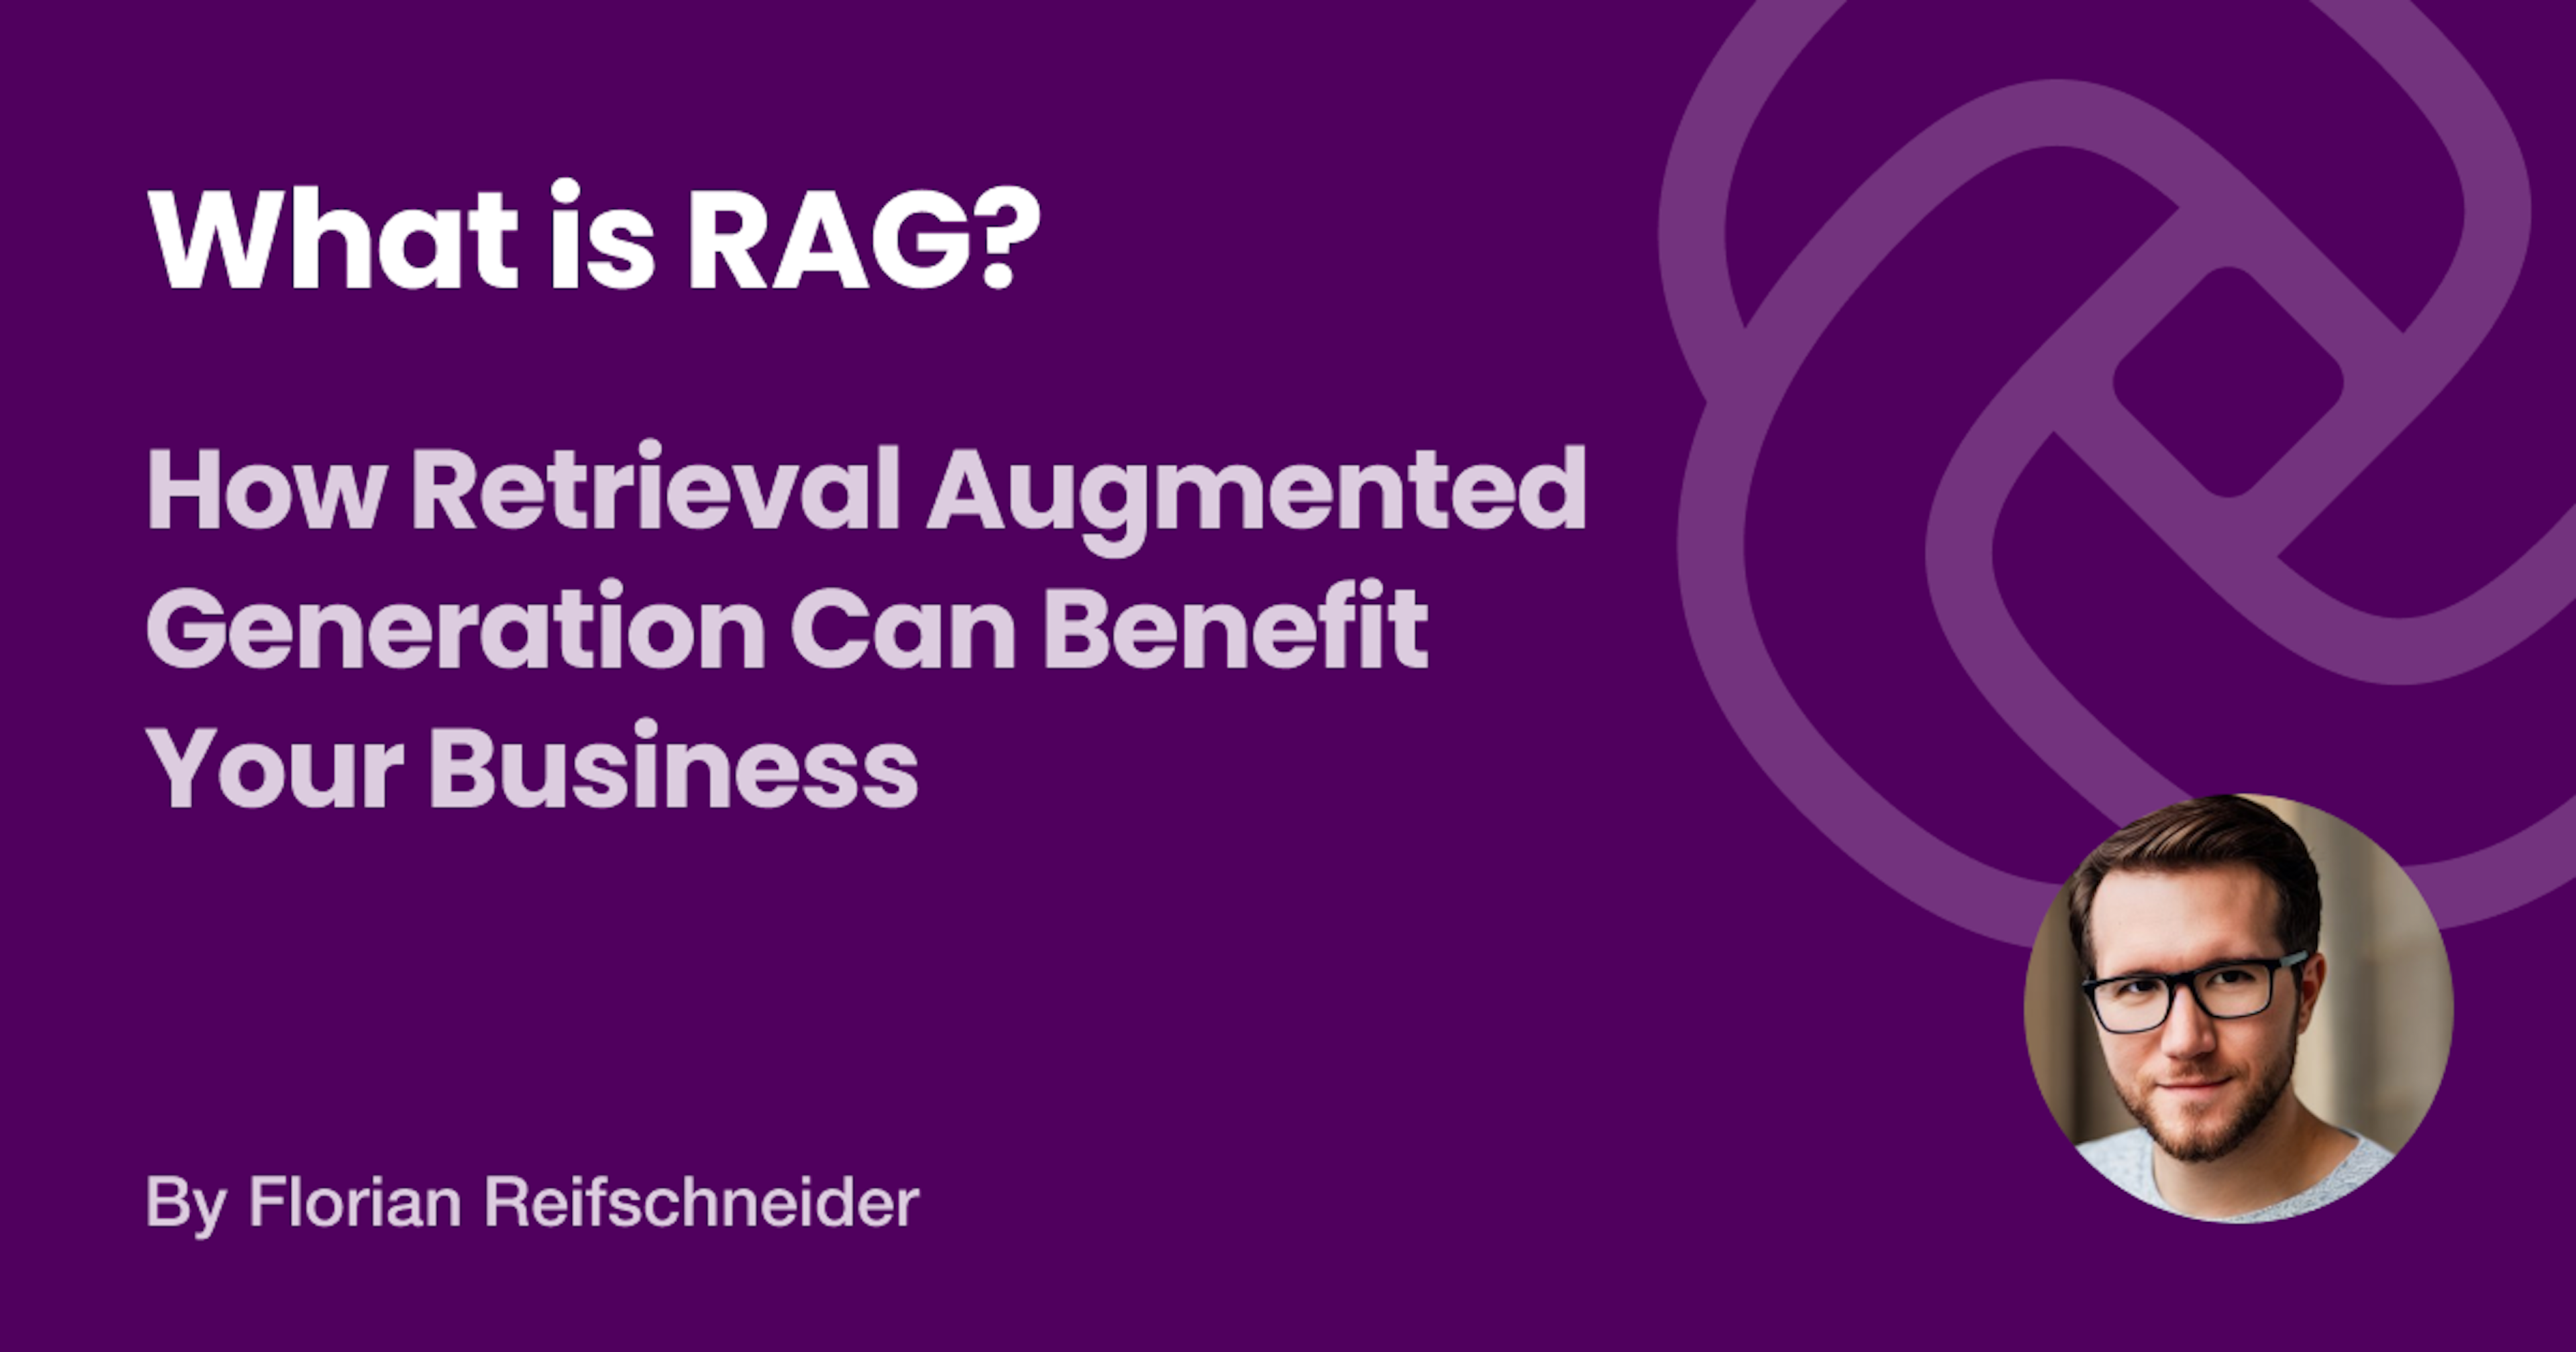 RAG is a powerful AI workflow that allows users to intuitively and effortlessly ask questions and gain insights into large amounts of documents.